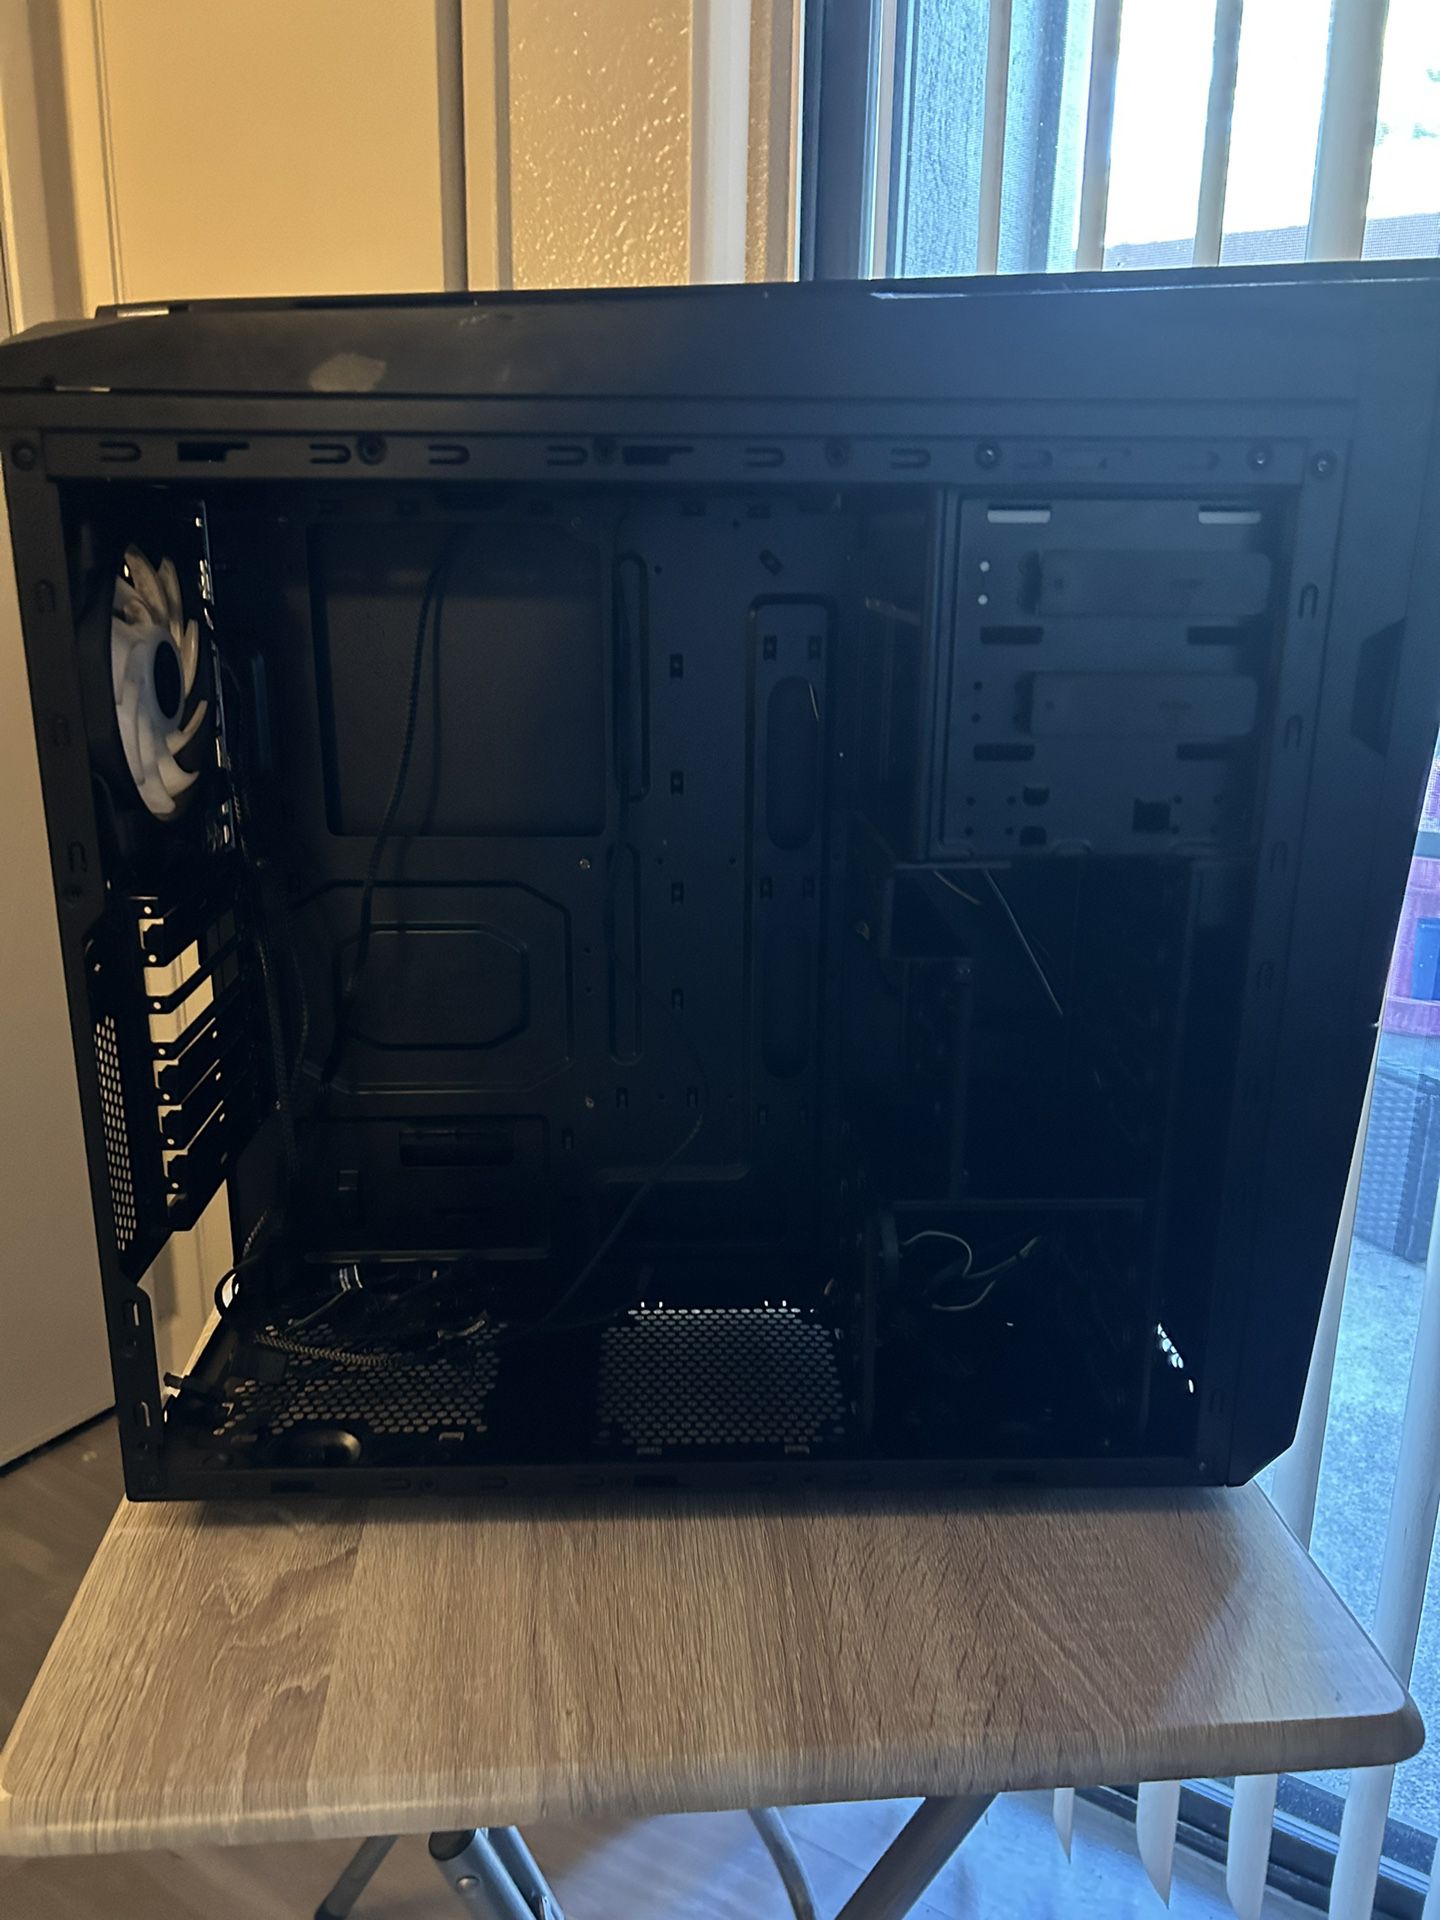 CyberPowerPc Model C Series Case with some fans 